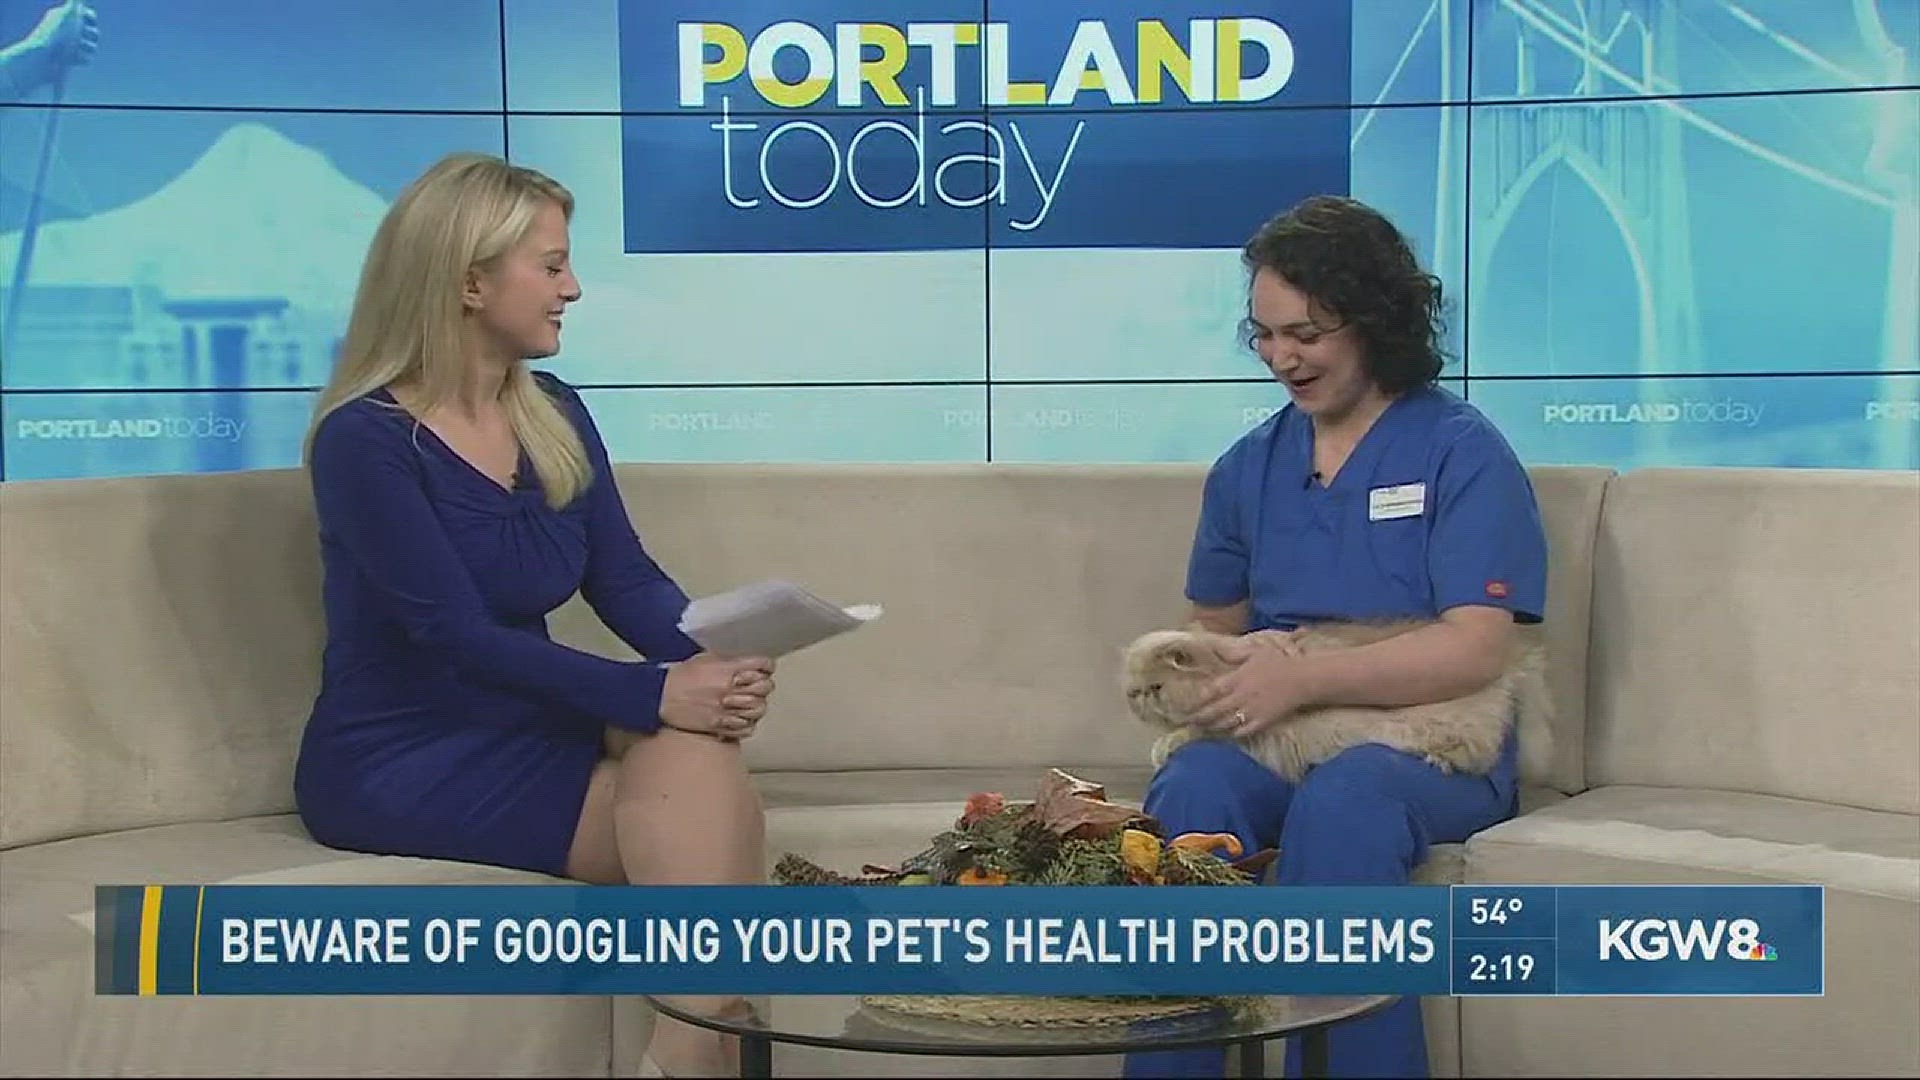 Beware of googling your pet's health problems